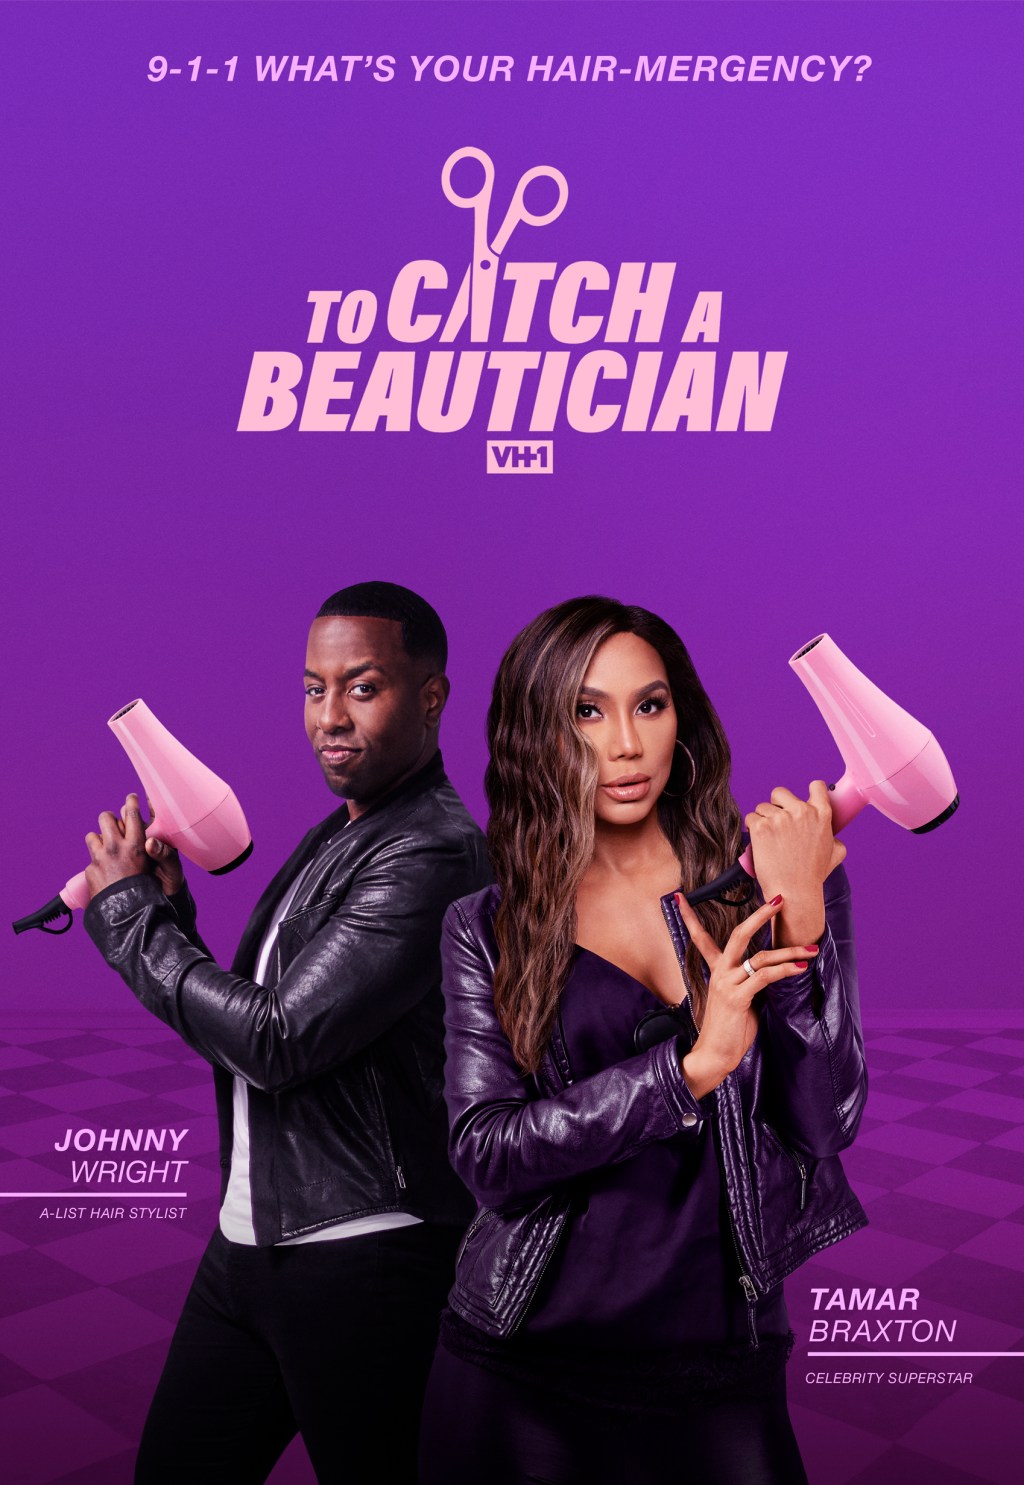 How To Catch A Beautician- Tamar & Johnny Wright